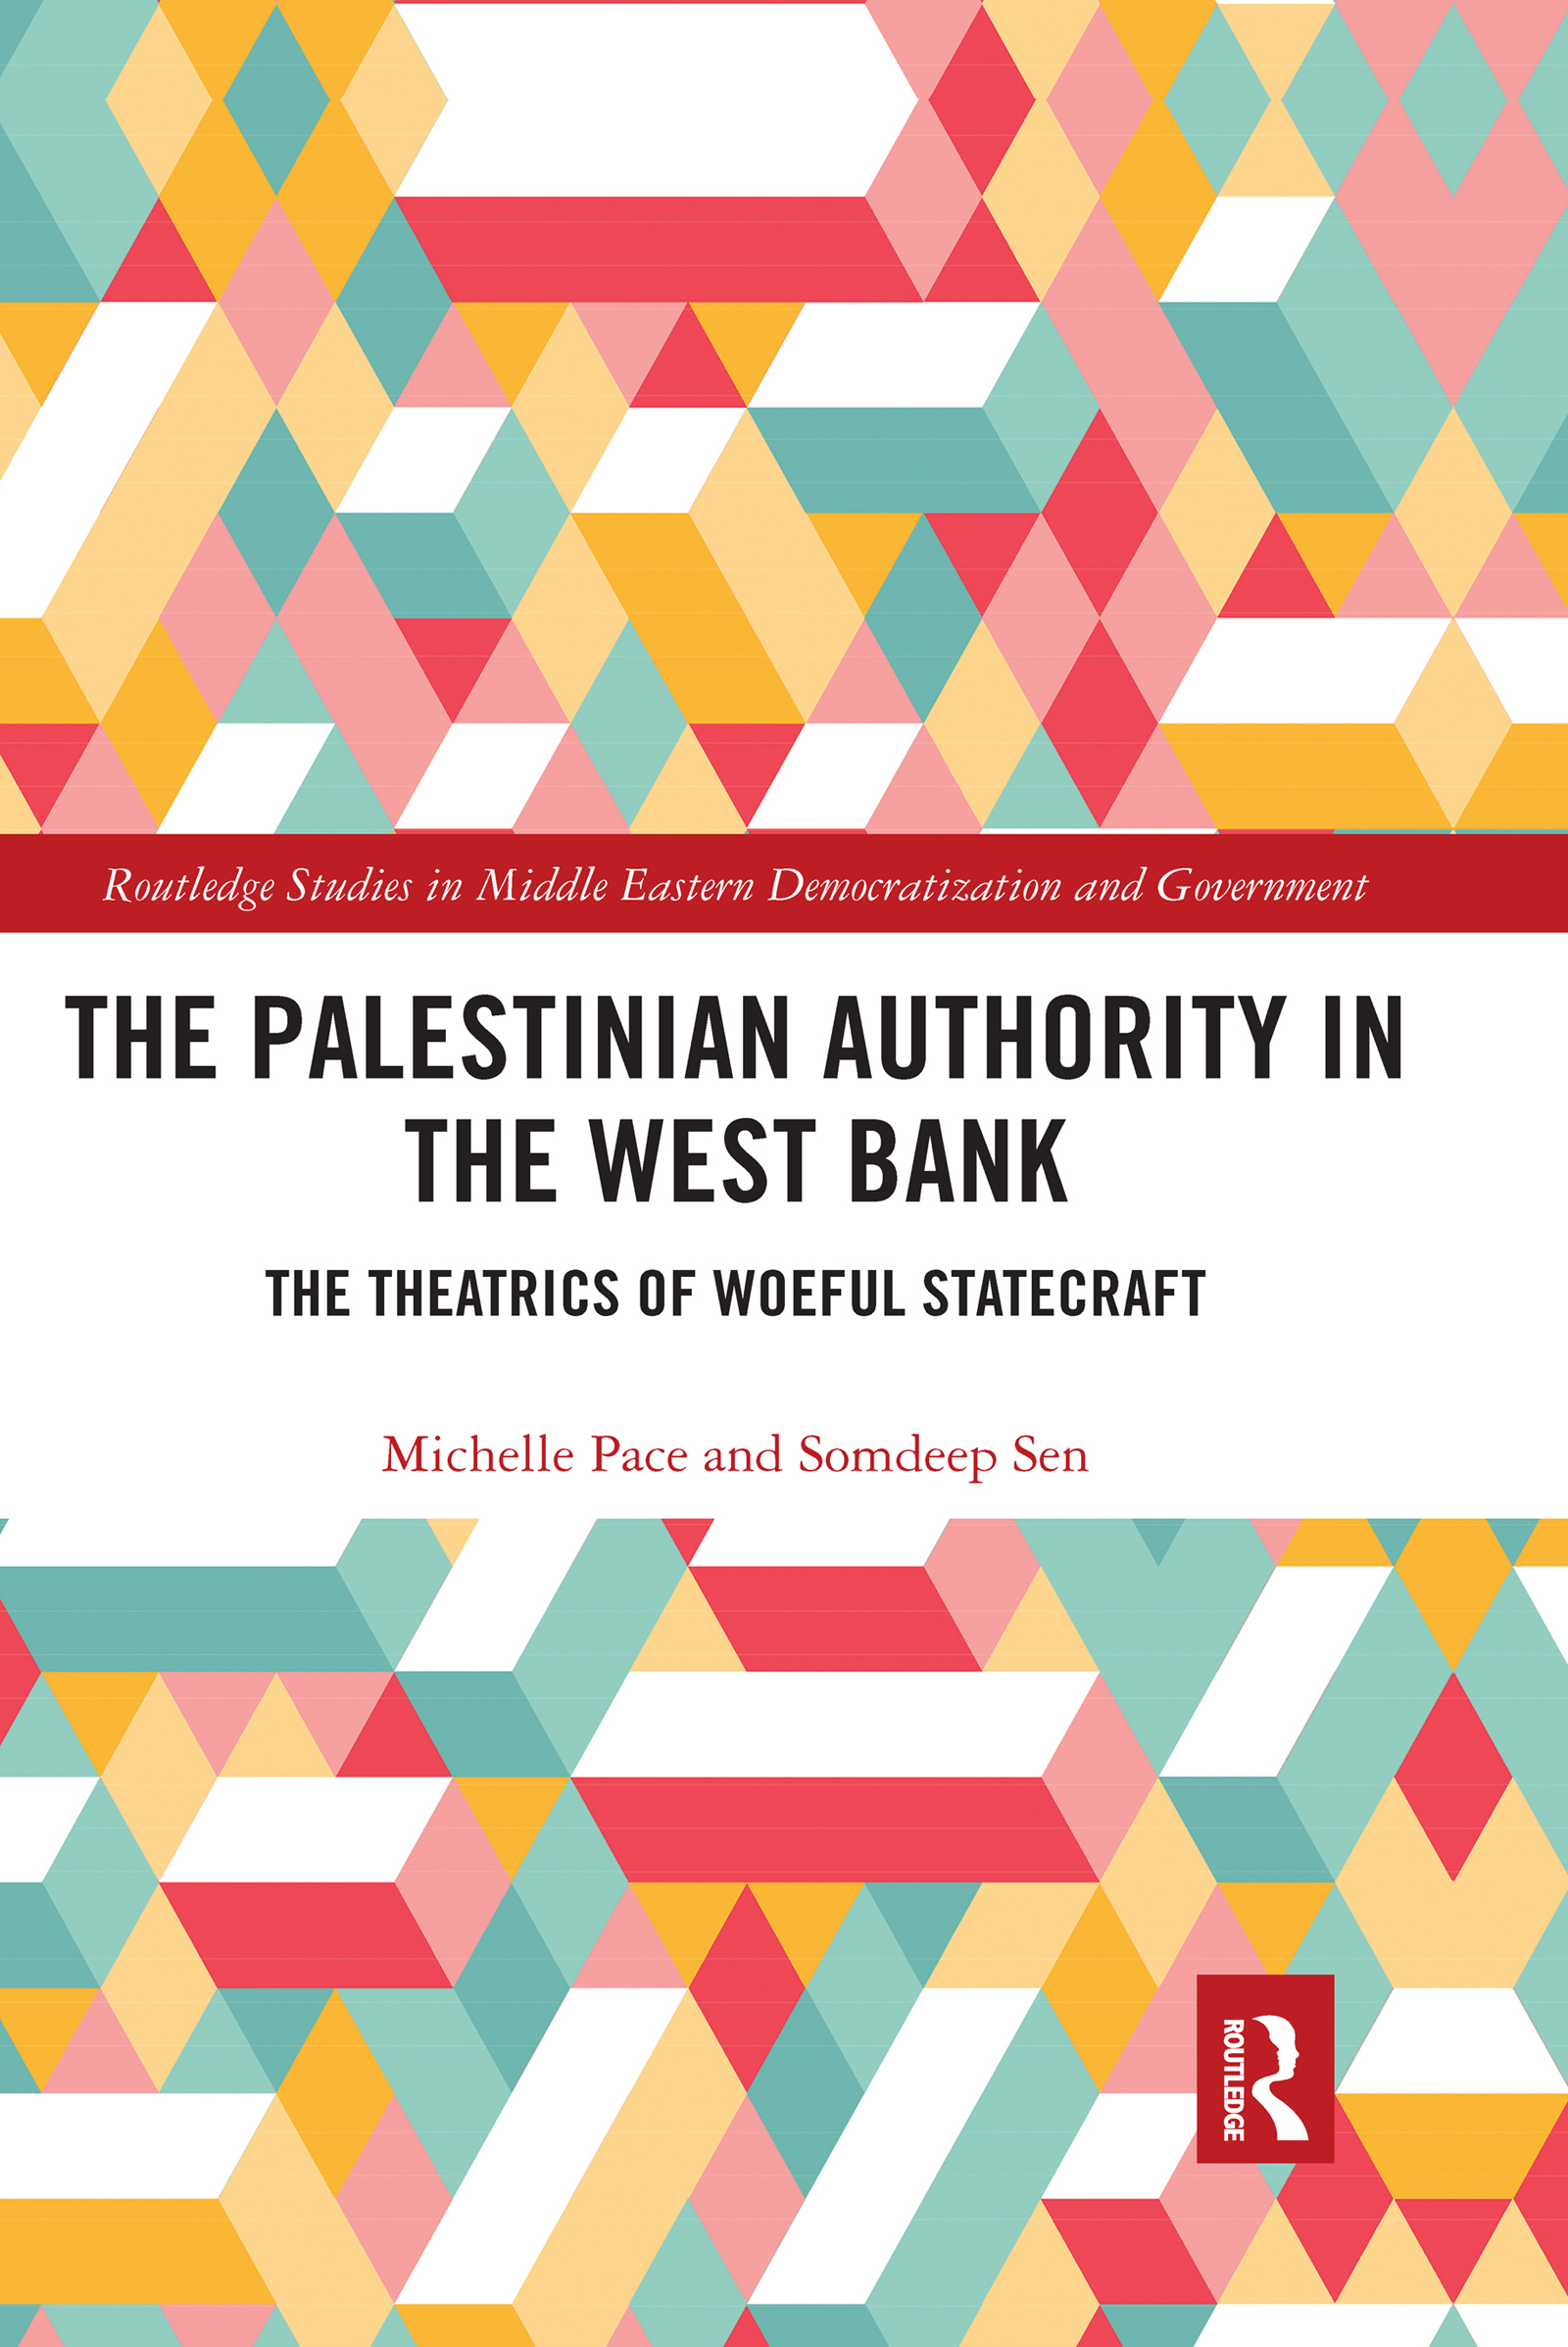 Abstract image, book cover for "The Palestinian Authority in the West Bank: The theatrics of woeful statecraft," by Michelle Pace and Somdeep Sen